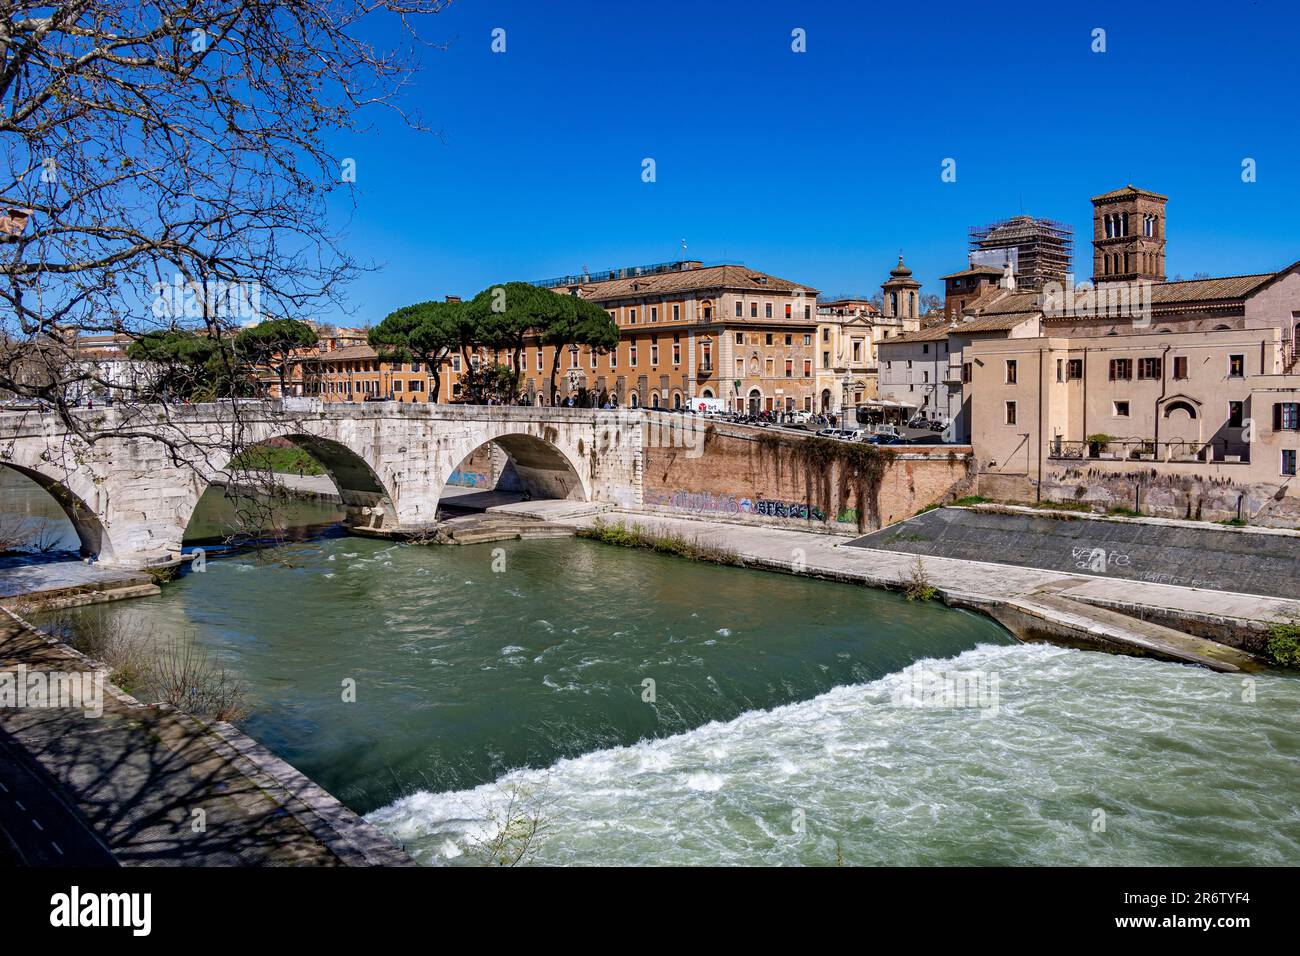 The Ponte Cestio bridge spanning The River Tiber  with Tiber Island in the background, Rome, Italy Stock Photo